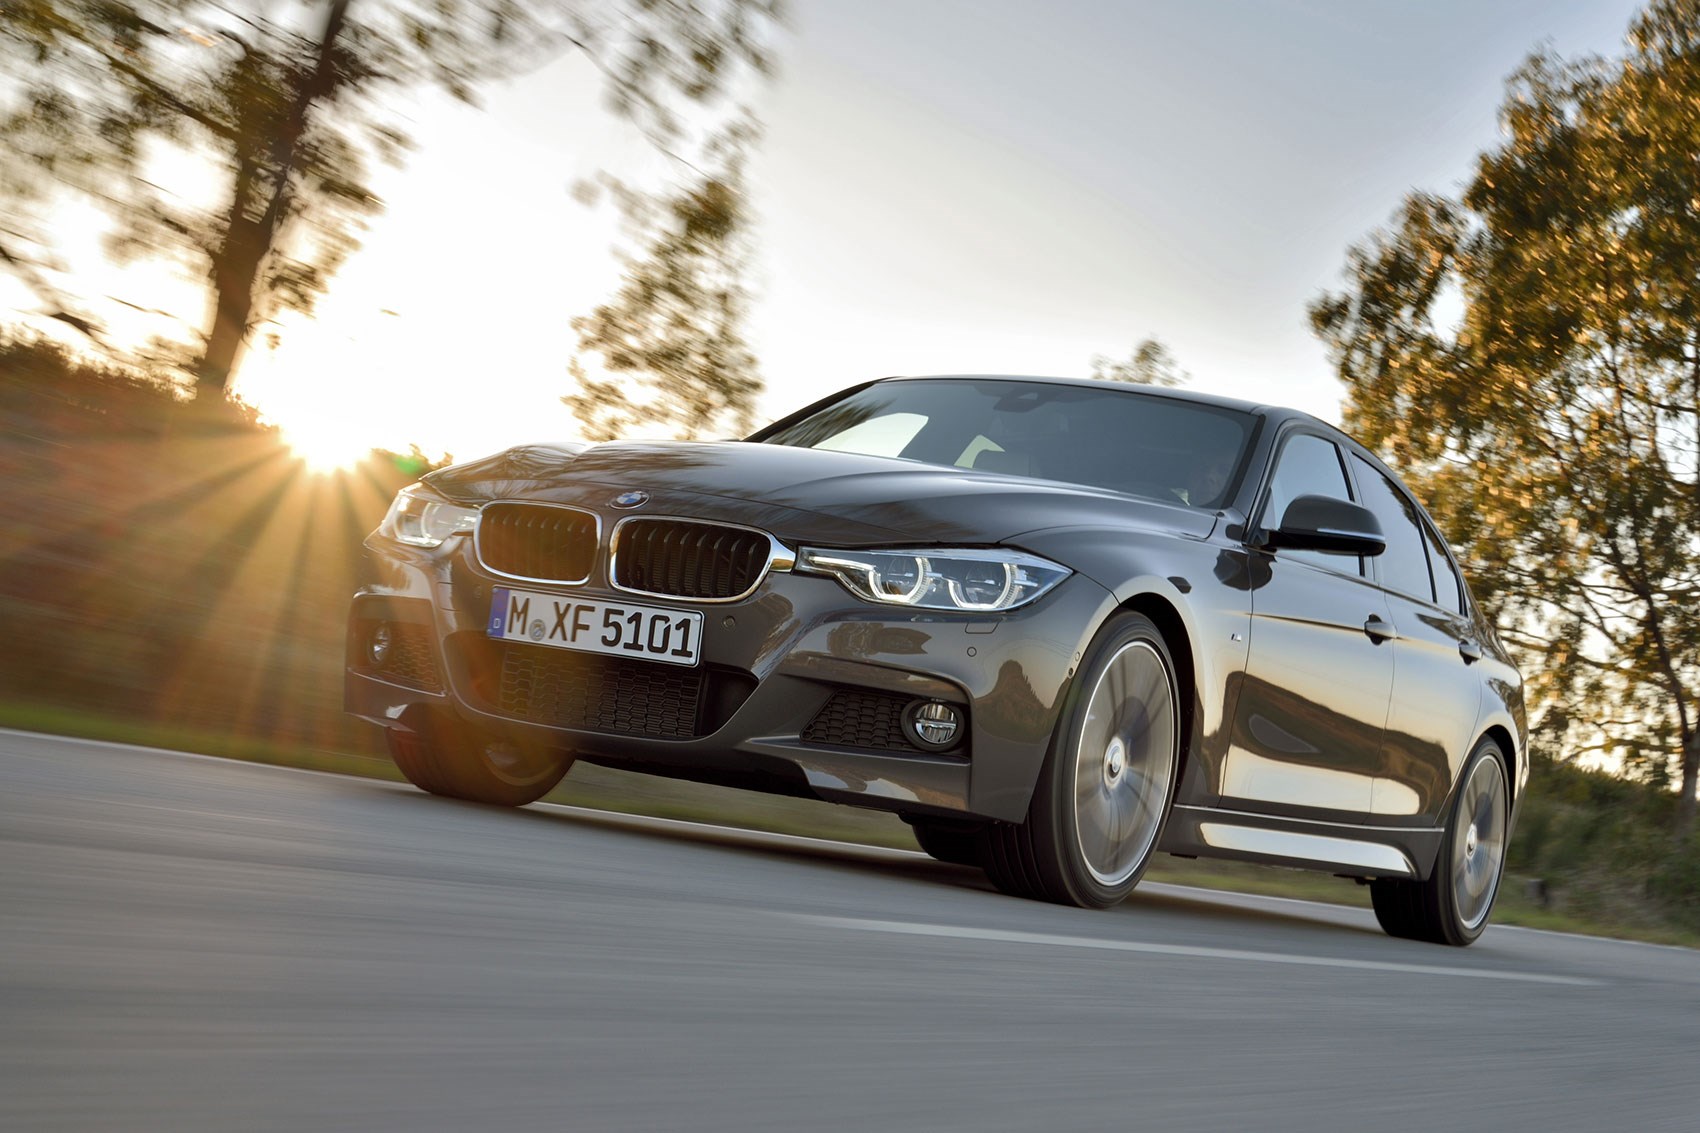 BMW reveals new Touring models of F30 3 series